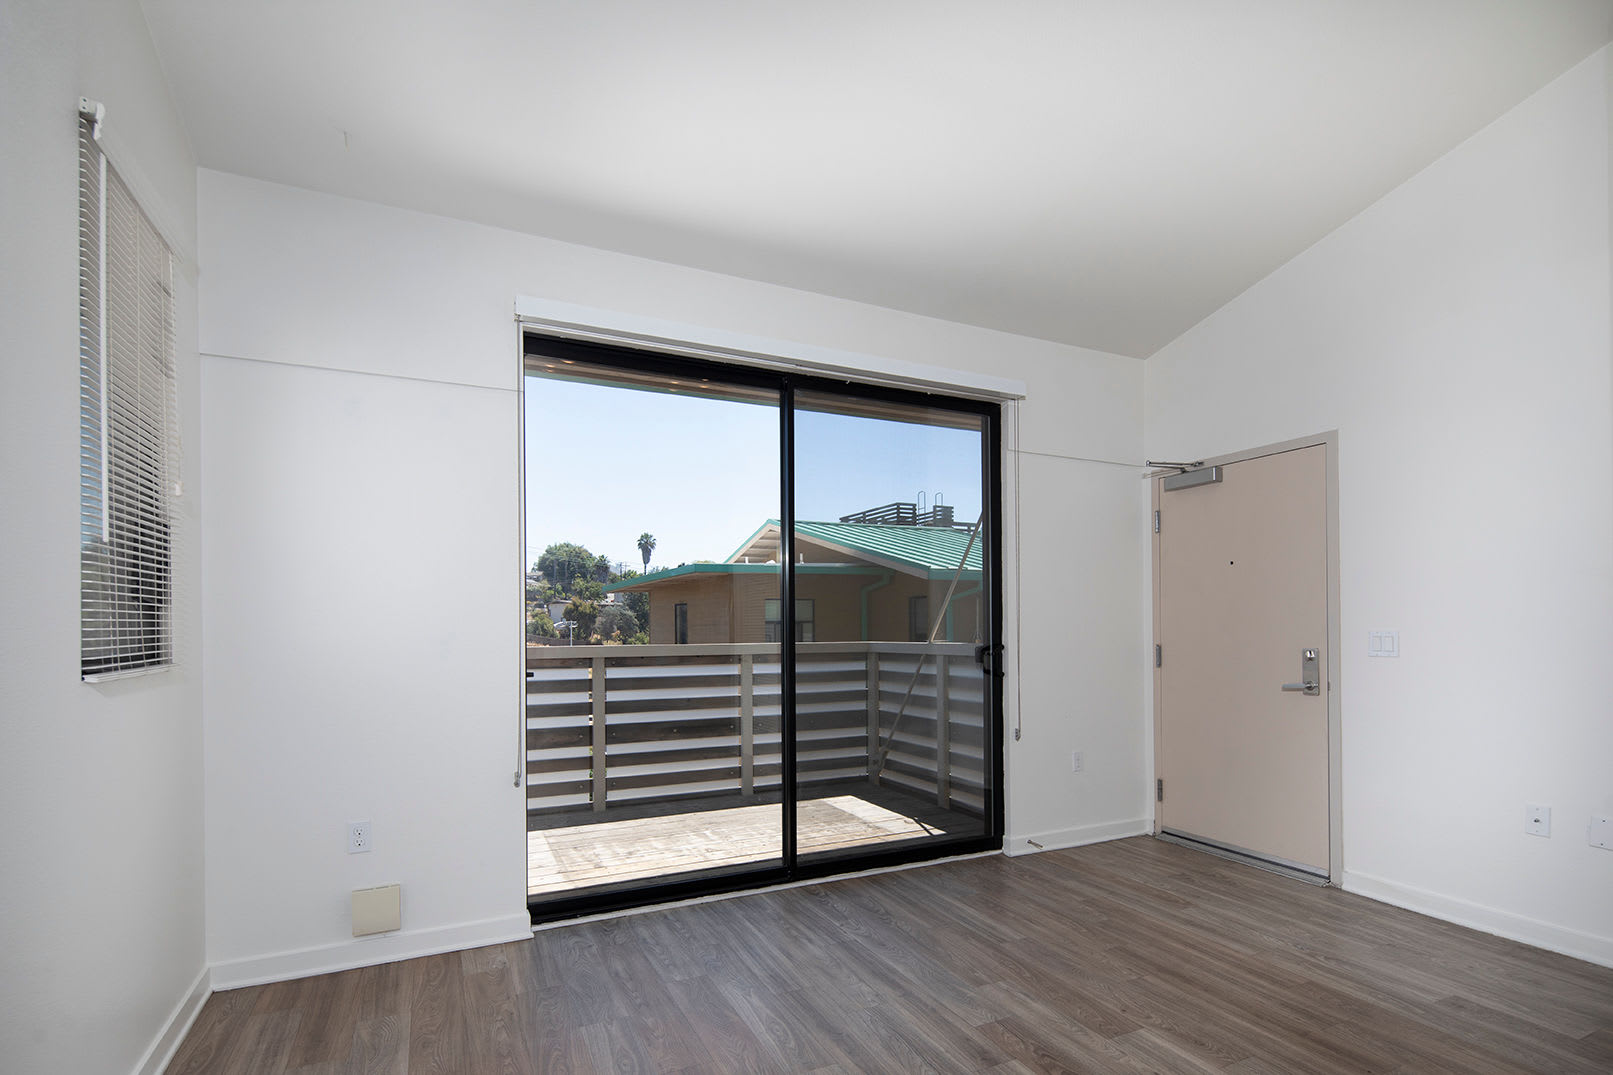 Model master bedroom with a balcony at The Quarry Apartments in La Mesa, California